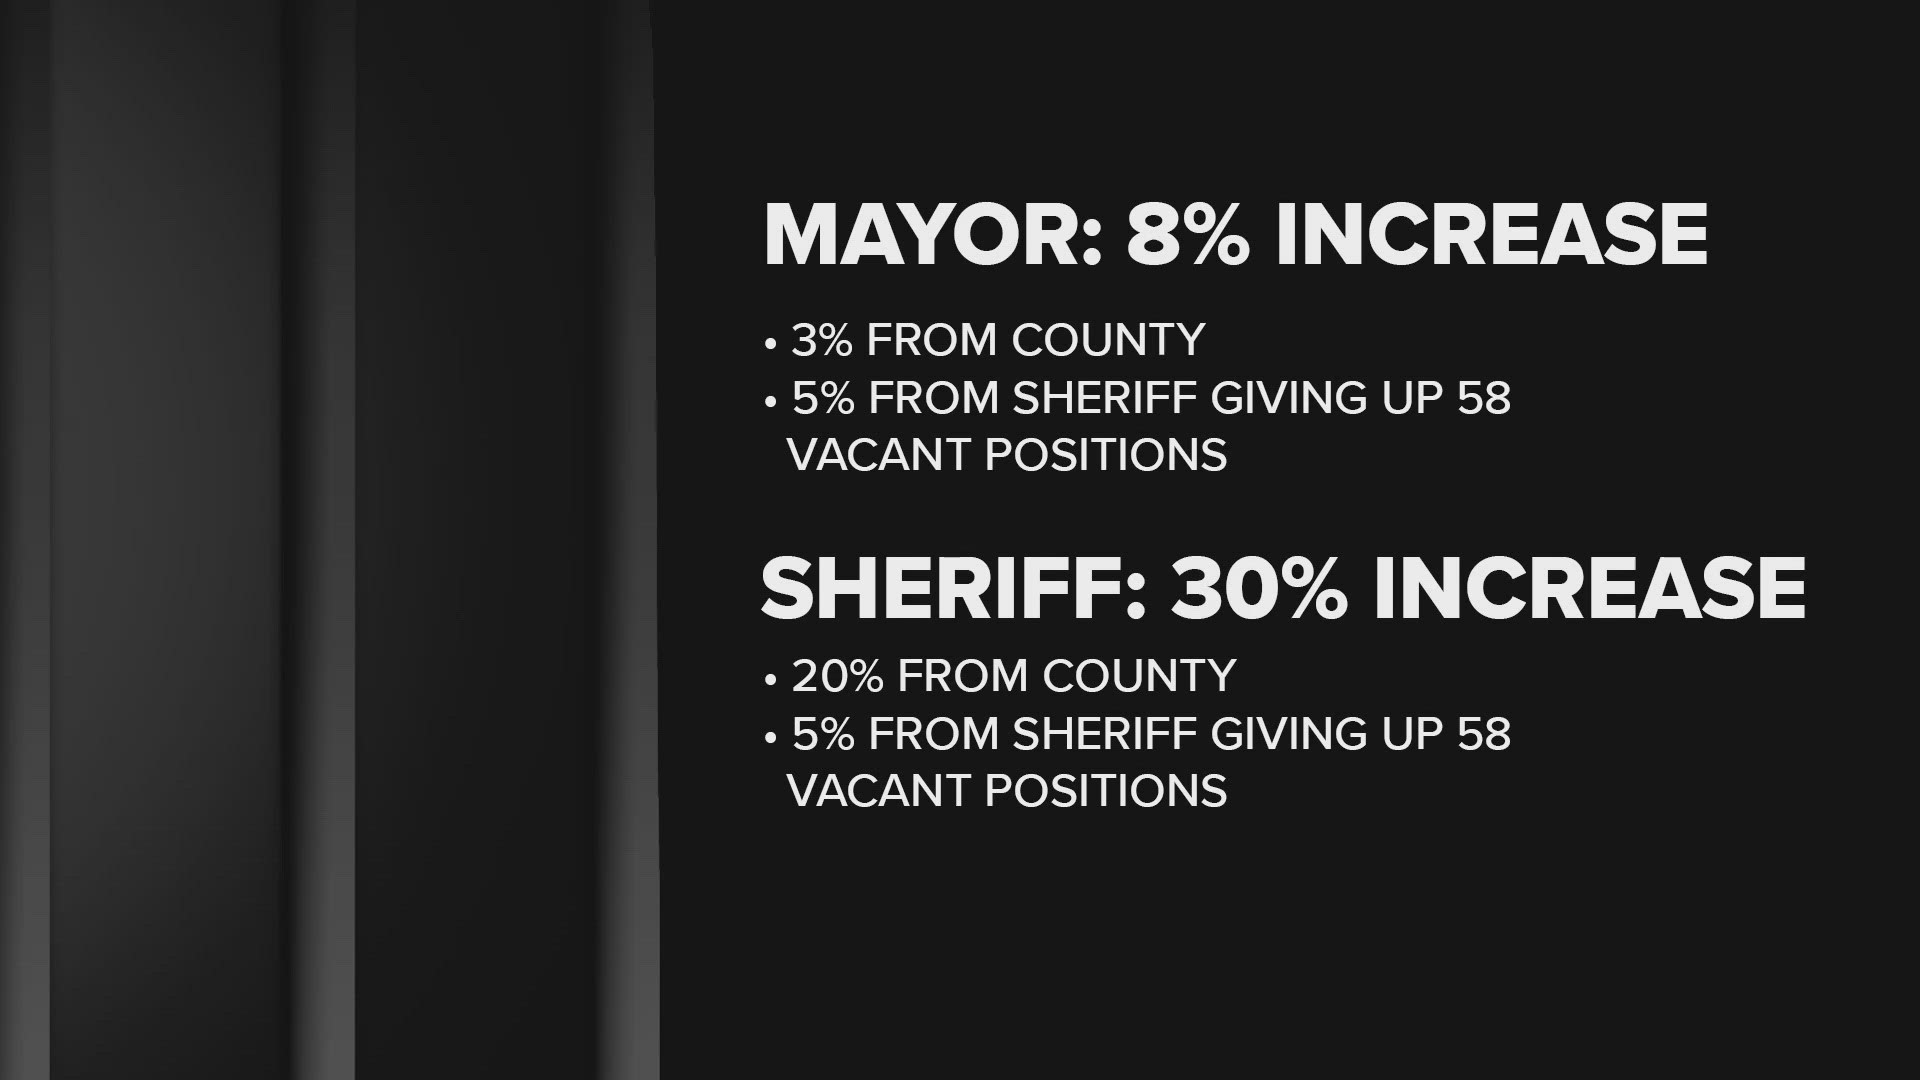 Starting patrol officers will be paid $51,100. Starting corrections officers will be paid $50,100.